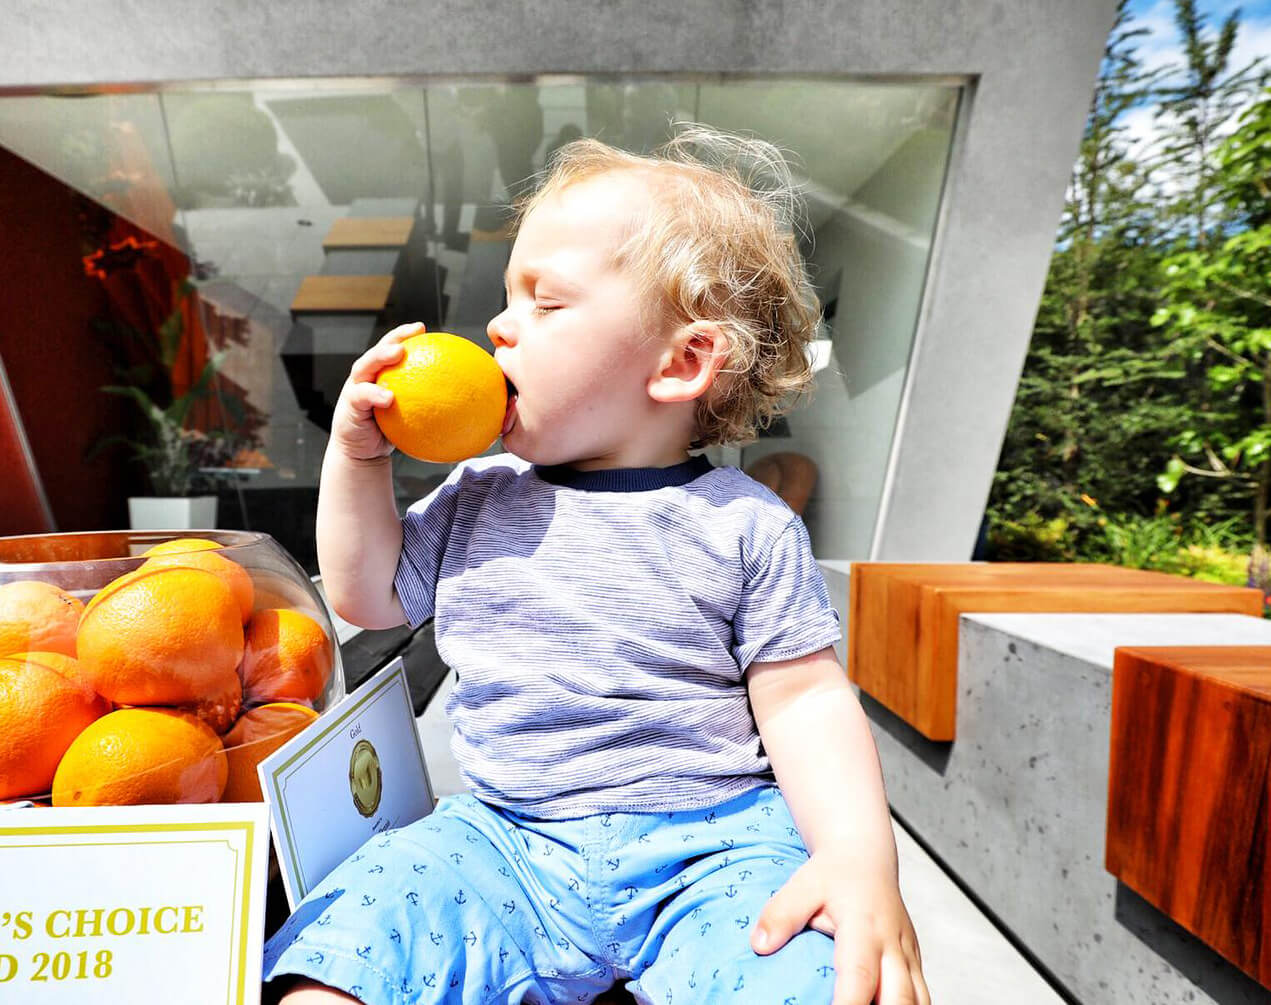 Kal Smith (1) from Navan enjoys the Fruit Juice Matters Garden at Bord Bia's Bloom 2018. Photo: Fennell Photography.